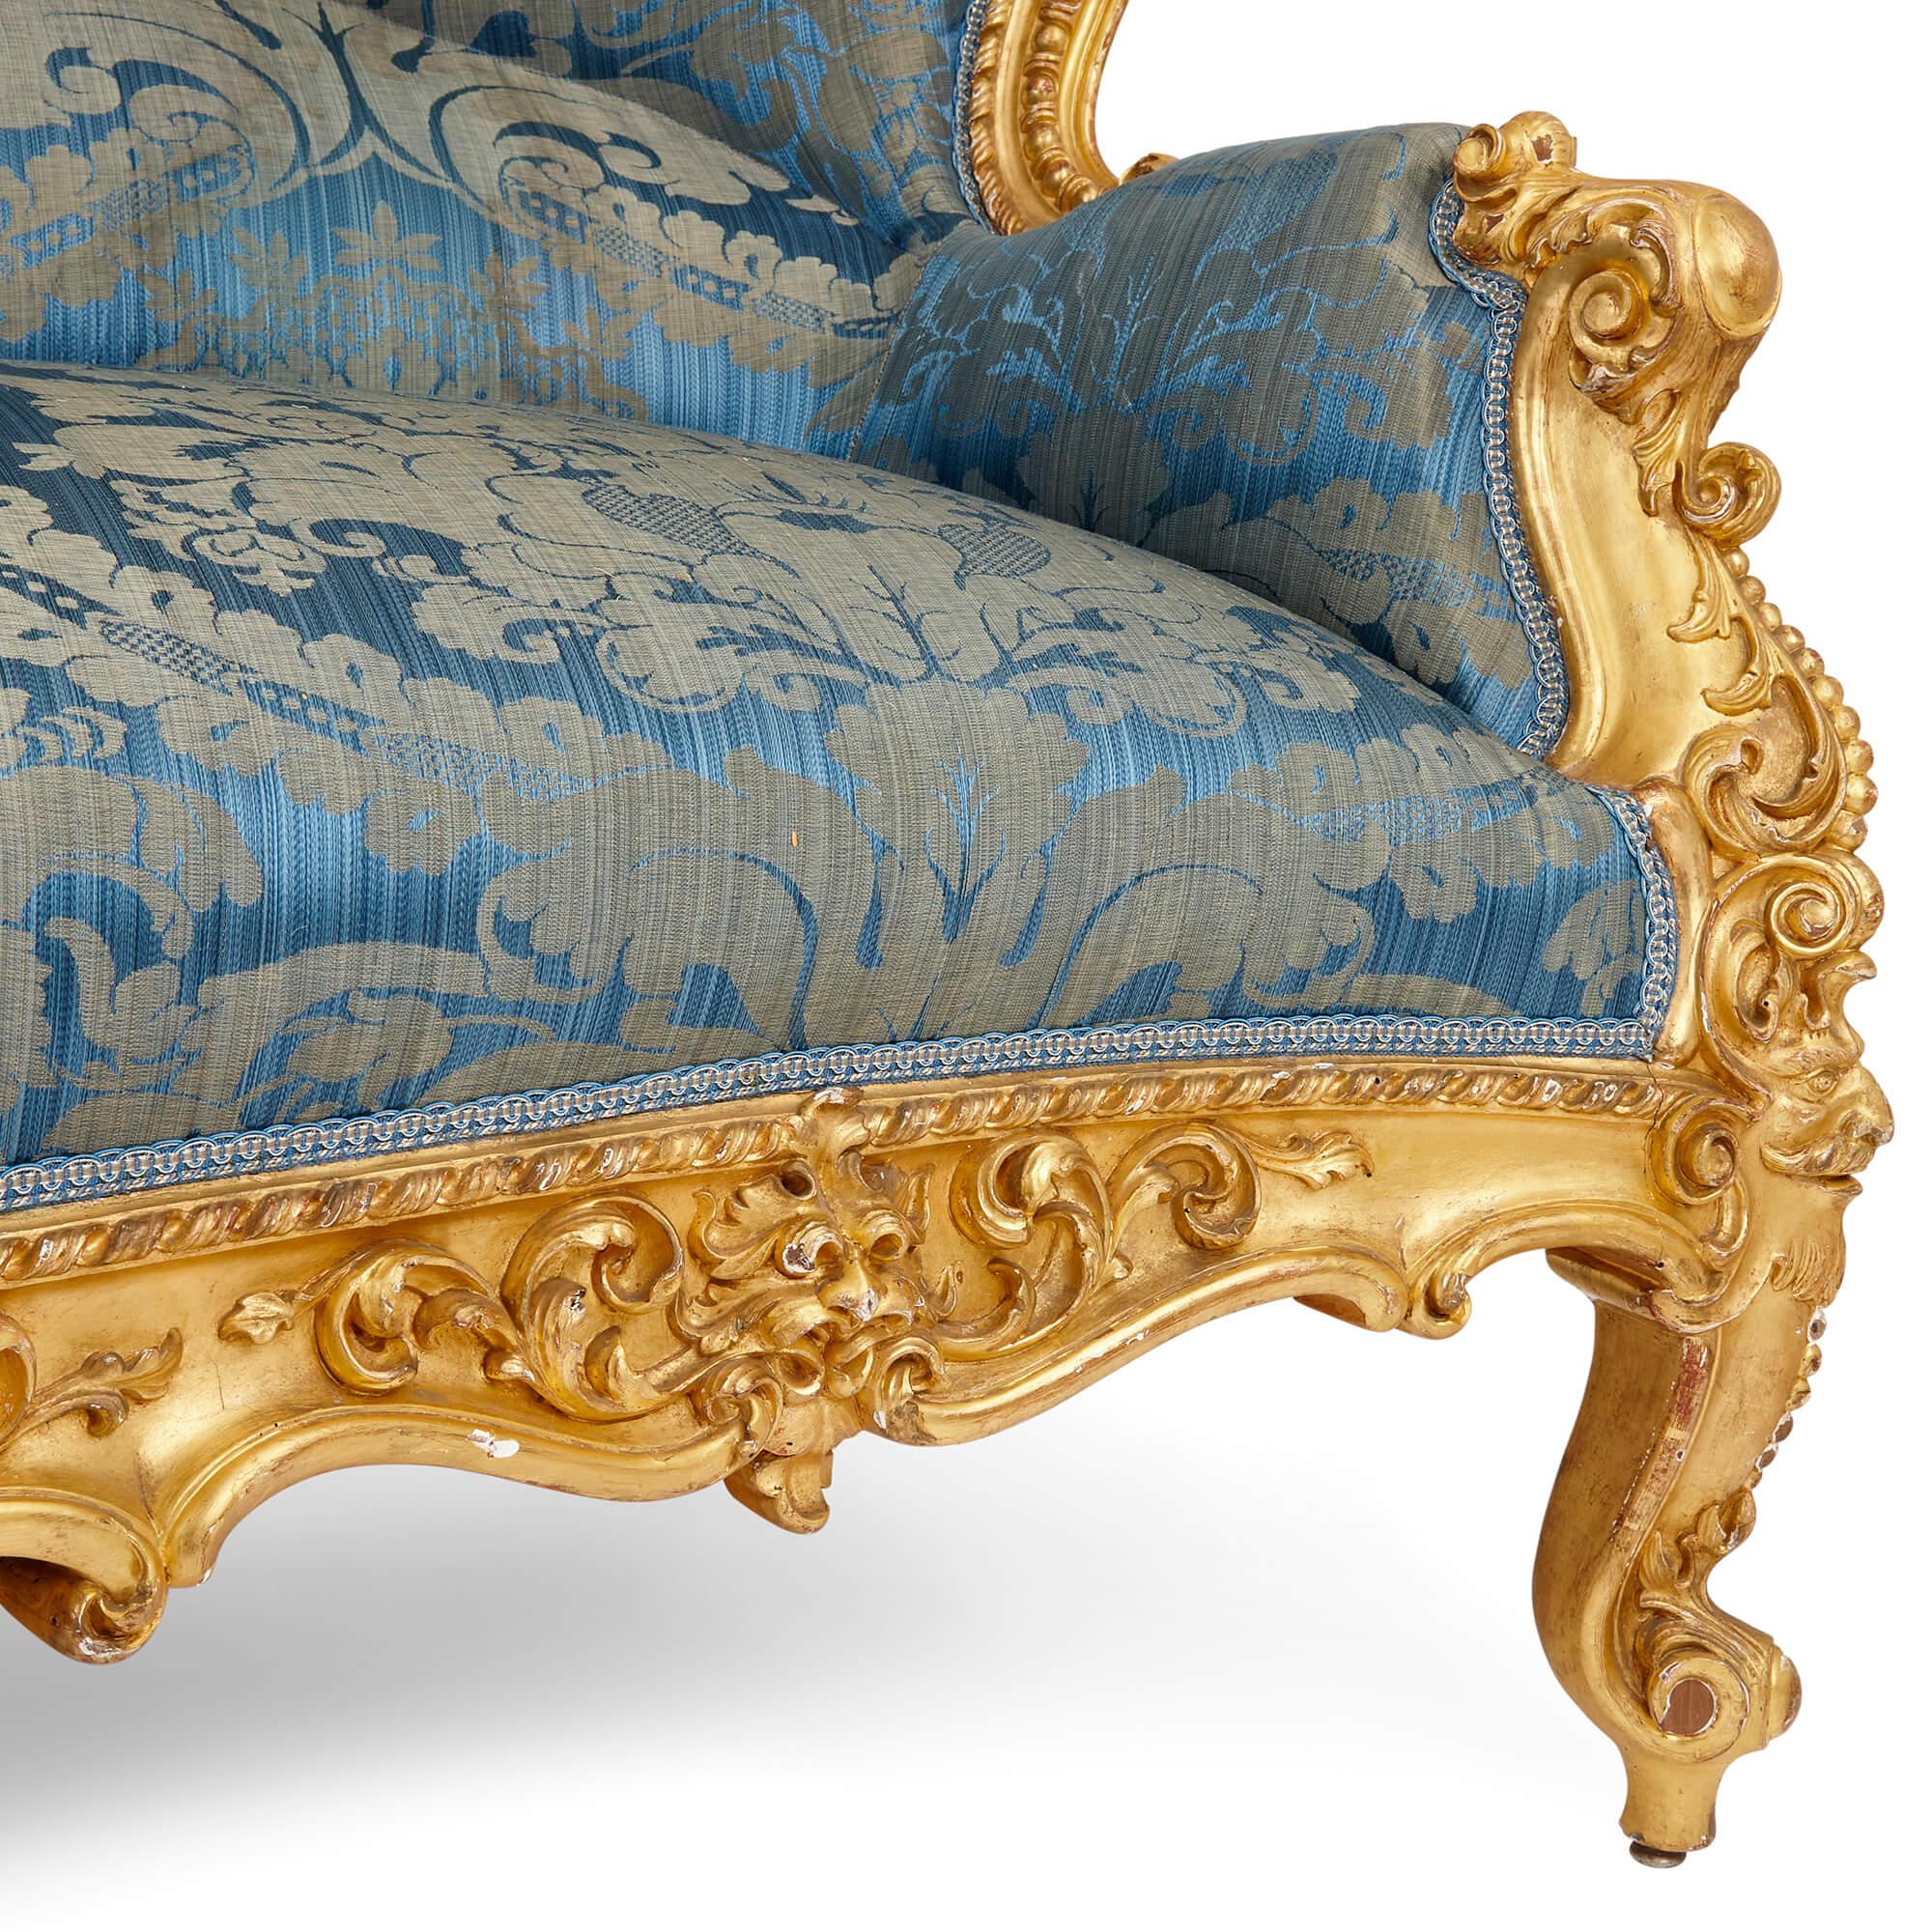 19th Century Large French Rococo Revival Style Giltwood Sofa For Sale